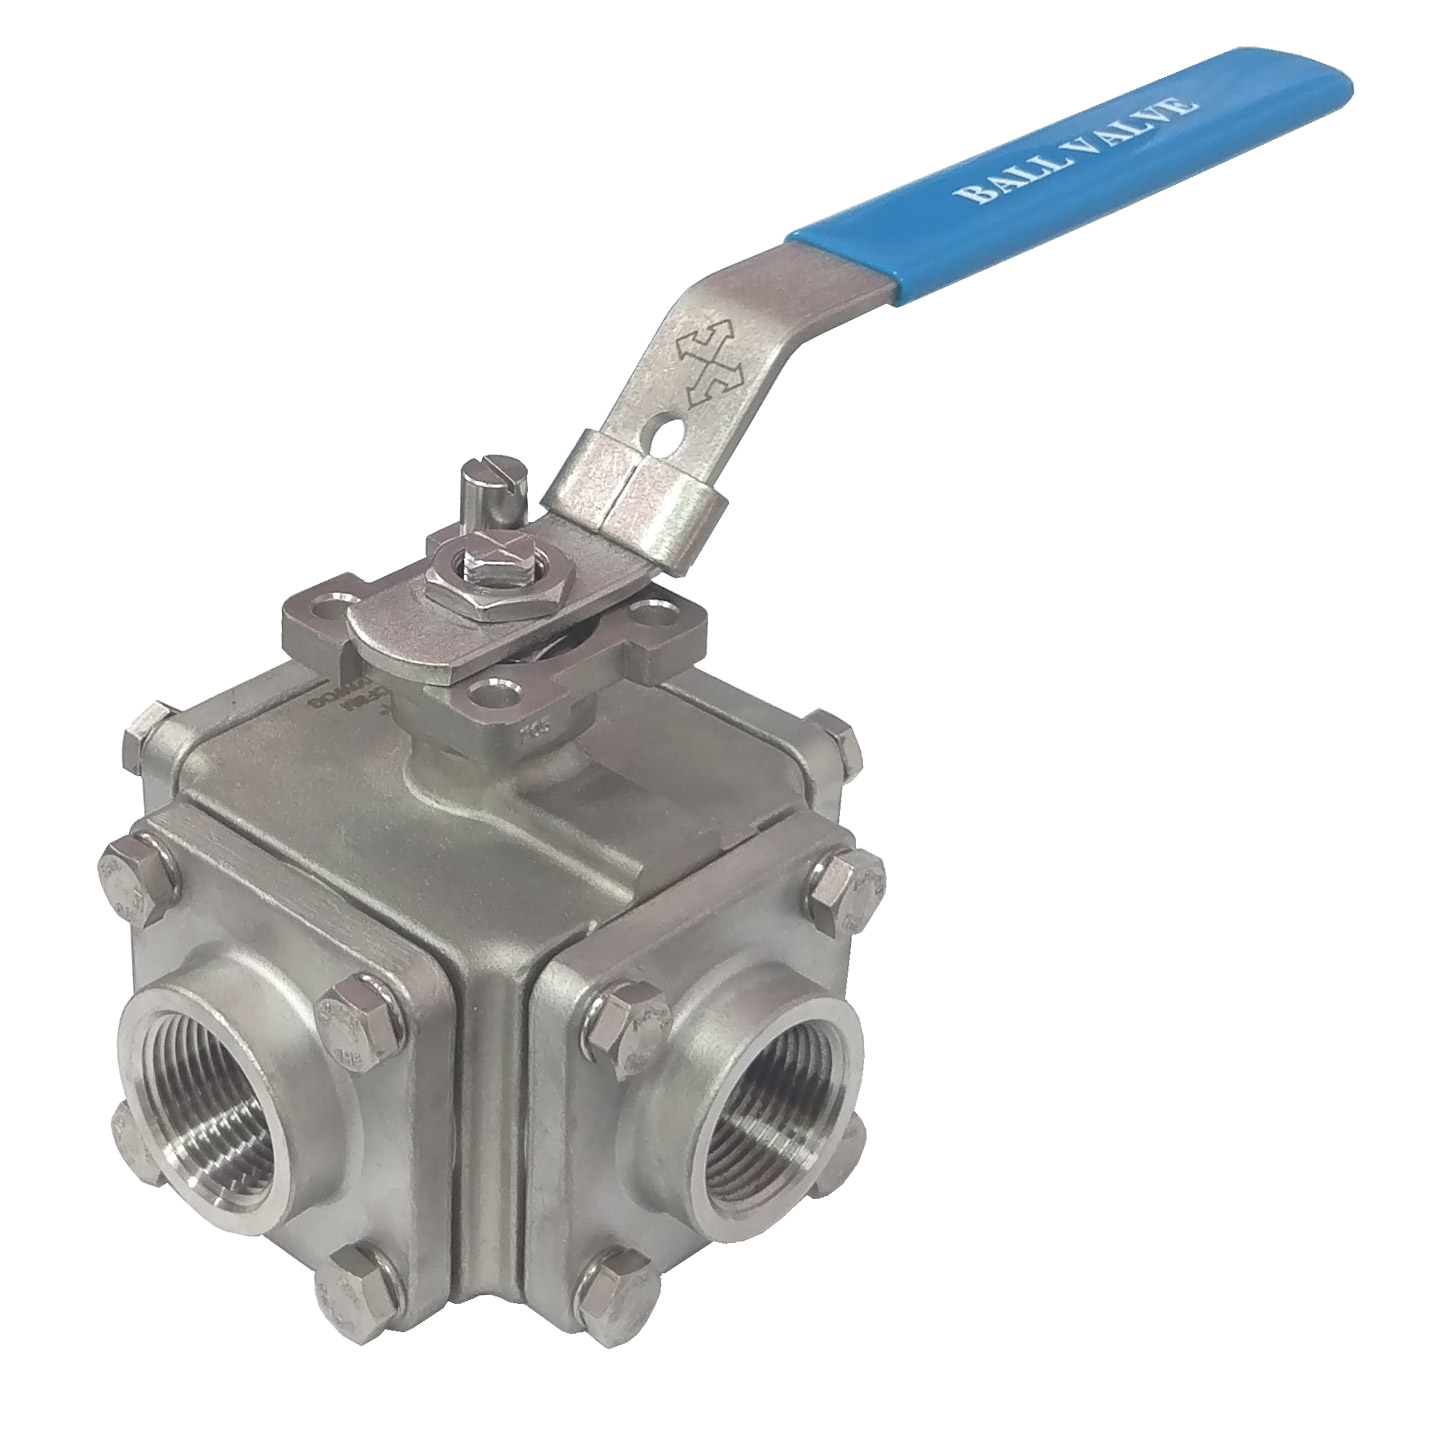 4-way ball valve, with ISO 5211 direct mounting pad